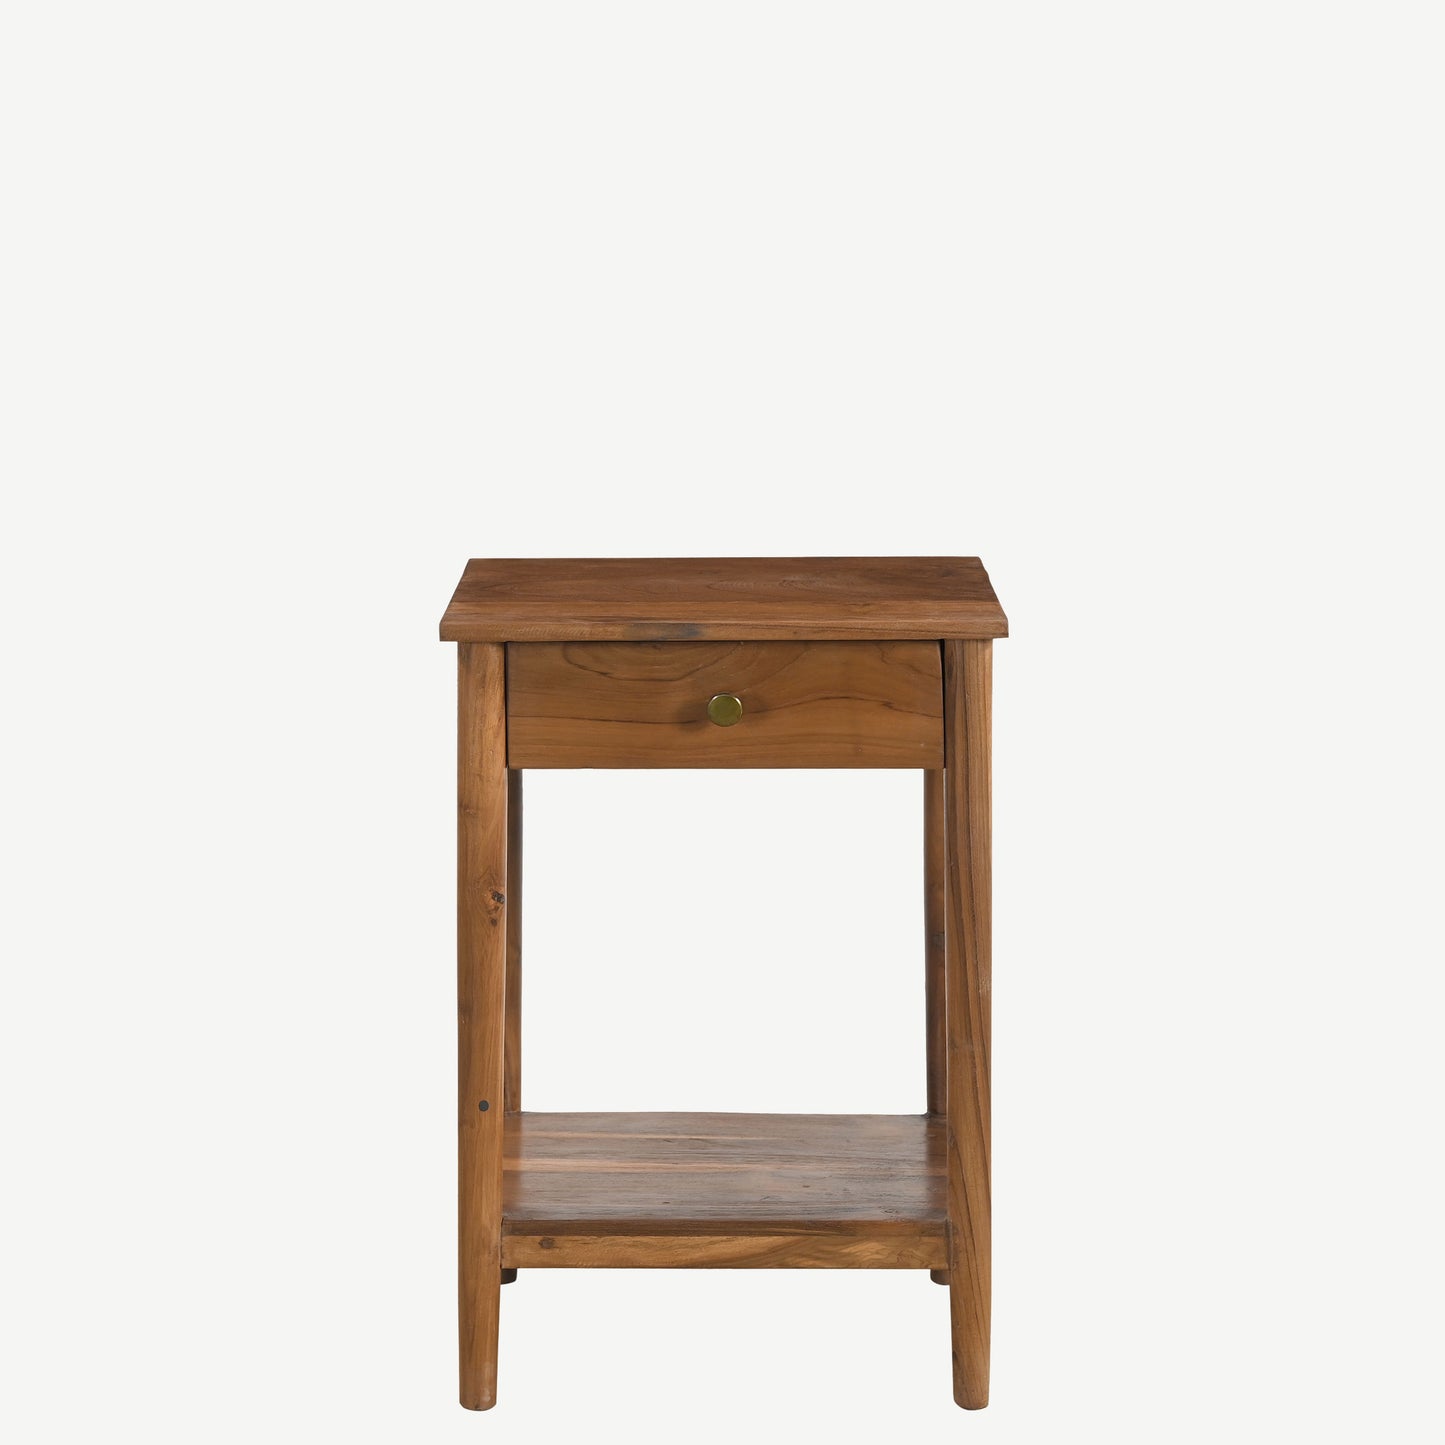 The Quin Antique Side Table